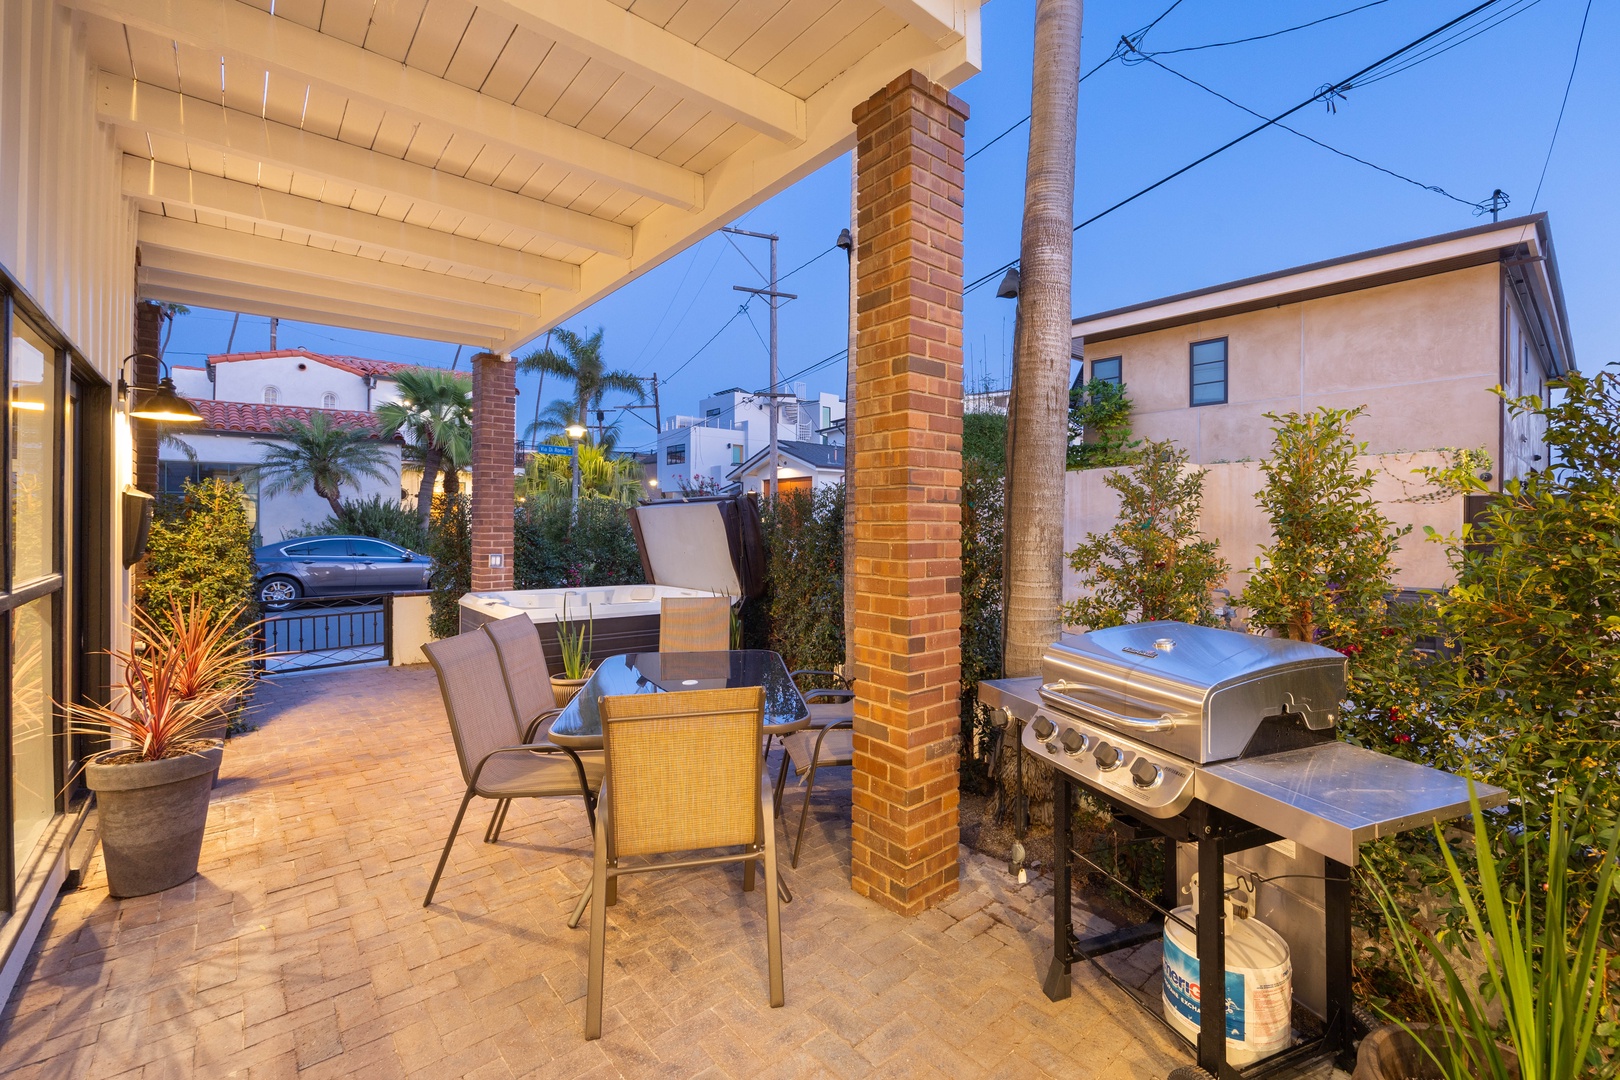 Outdoor dining area with BBQ